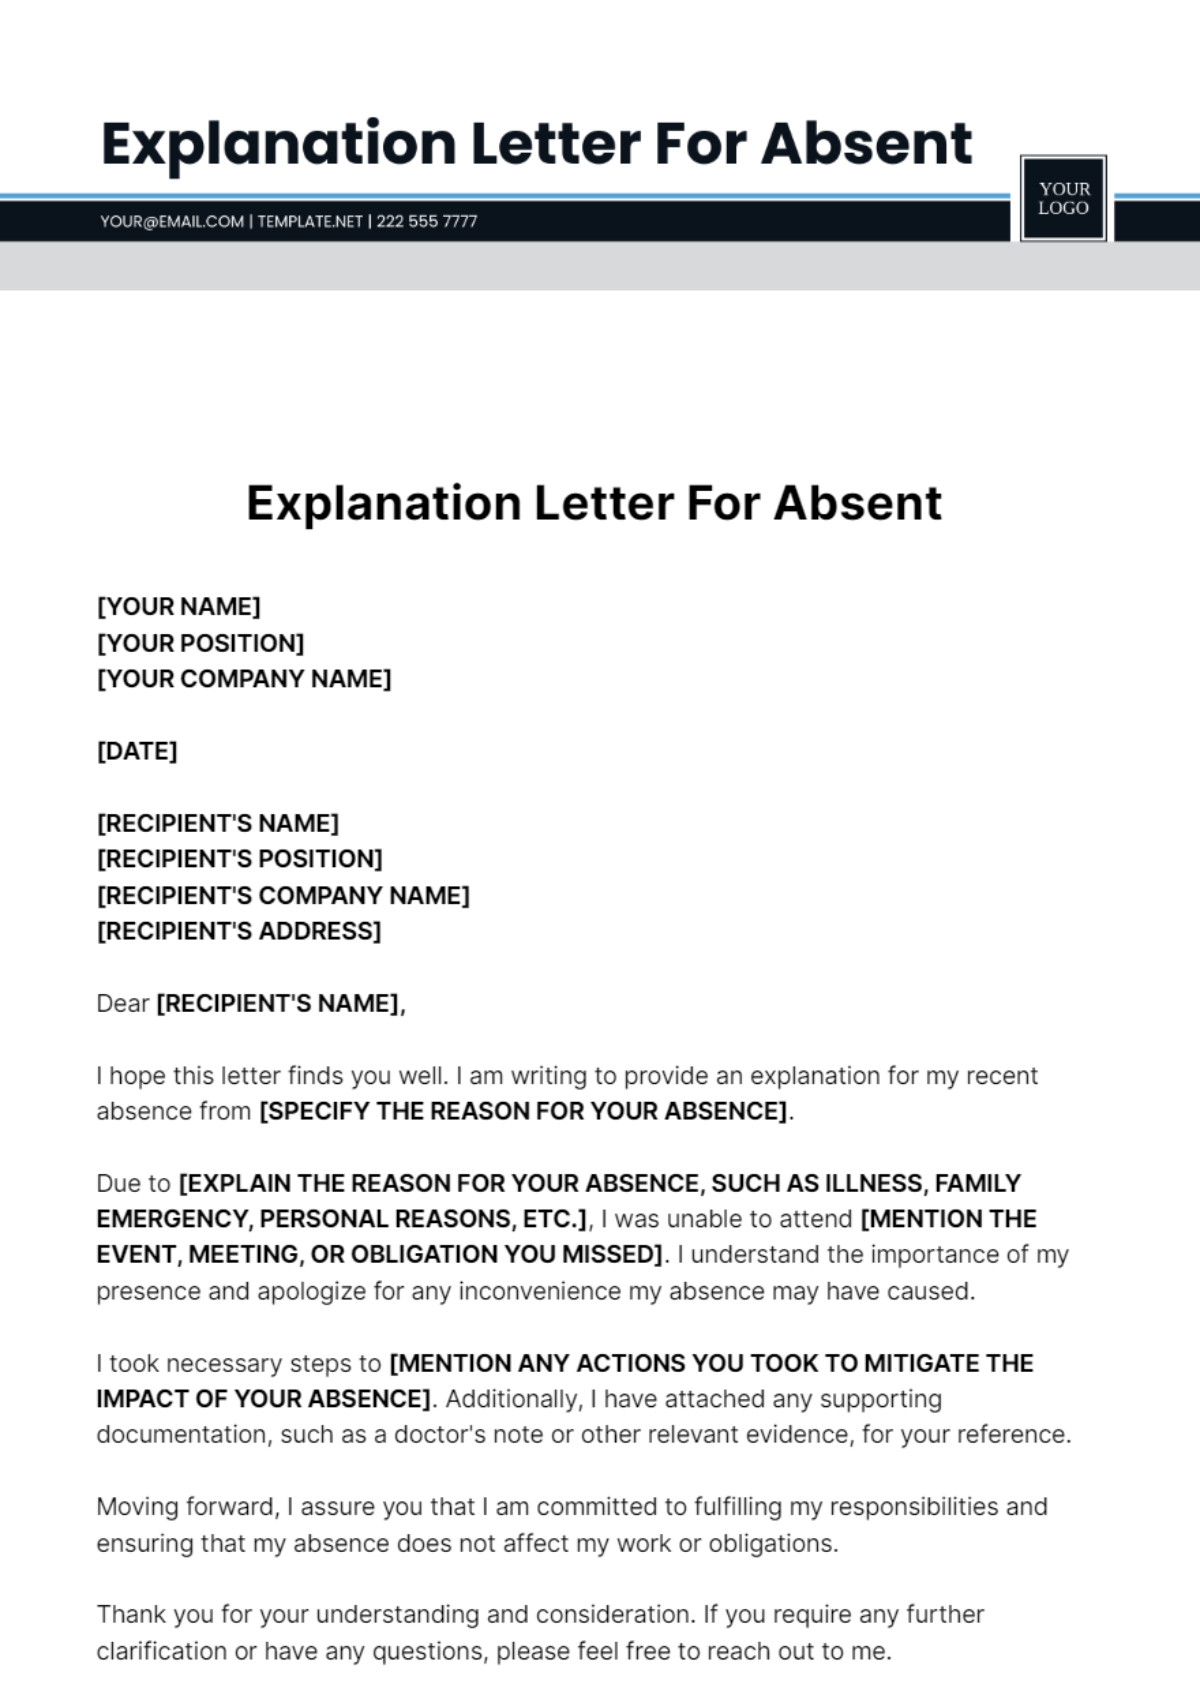 Explanation Letter For Absent Template